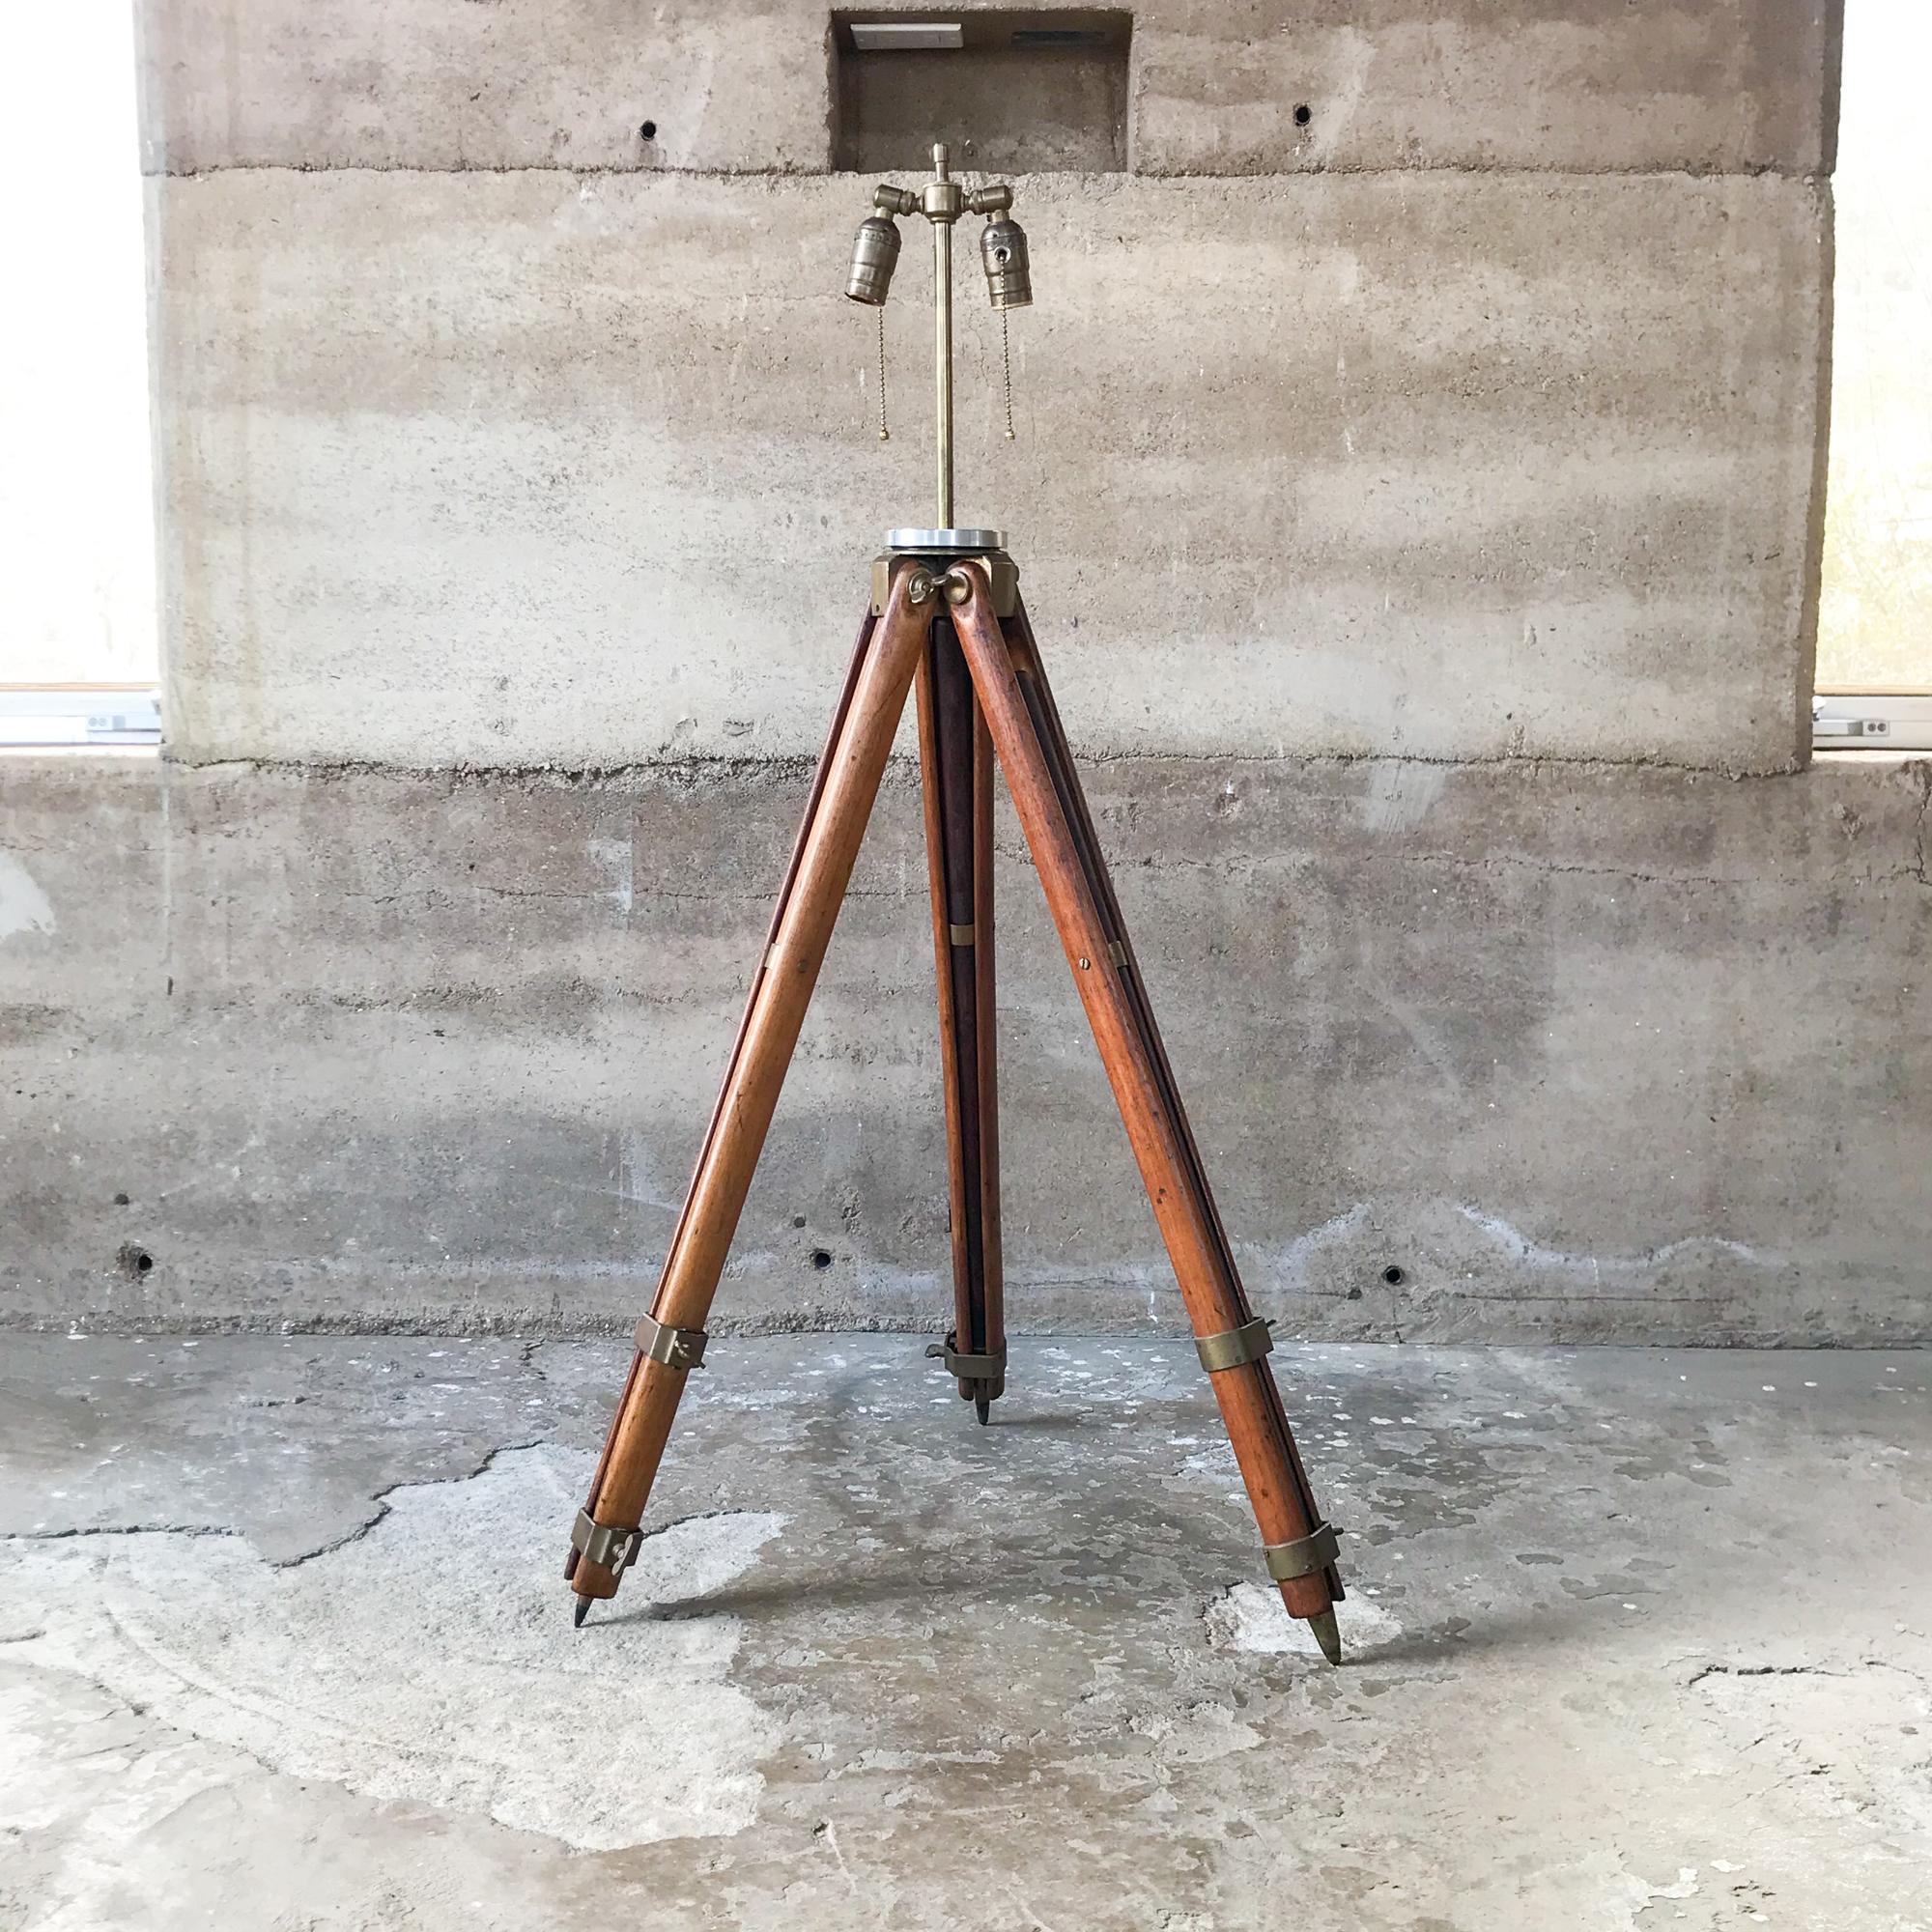 Good looking antique up-cycled architect's engineering floor lamp with vintage tripod surveying base. Two sockets with pull chains. Fabulous plus clever piece!
Surveyor base is vintage antique oak and brass transit tripod surveyor attributed to W &